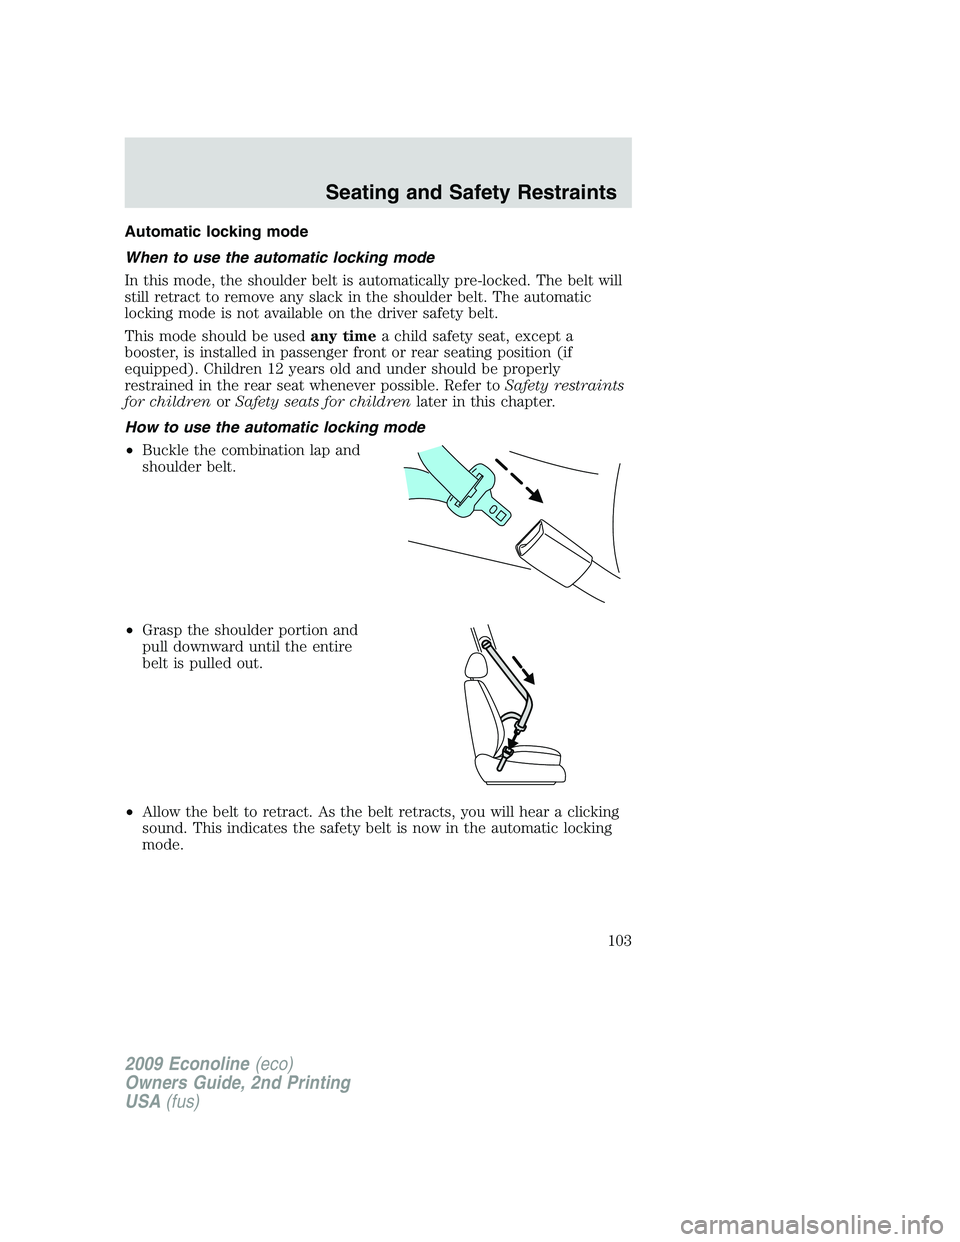 FORD E450 2009  Owners Manual Automatic locking mode
When to use the automatic locking mode
In this mode, the shoulder belt is automatically pre-locked. The belt will
still retract to remove any slack in the shoulder belt. The aut